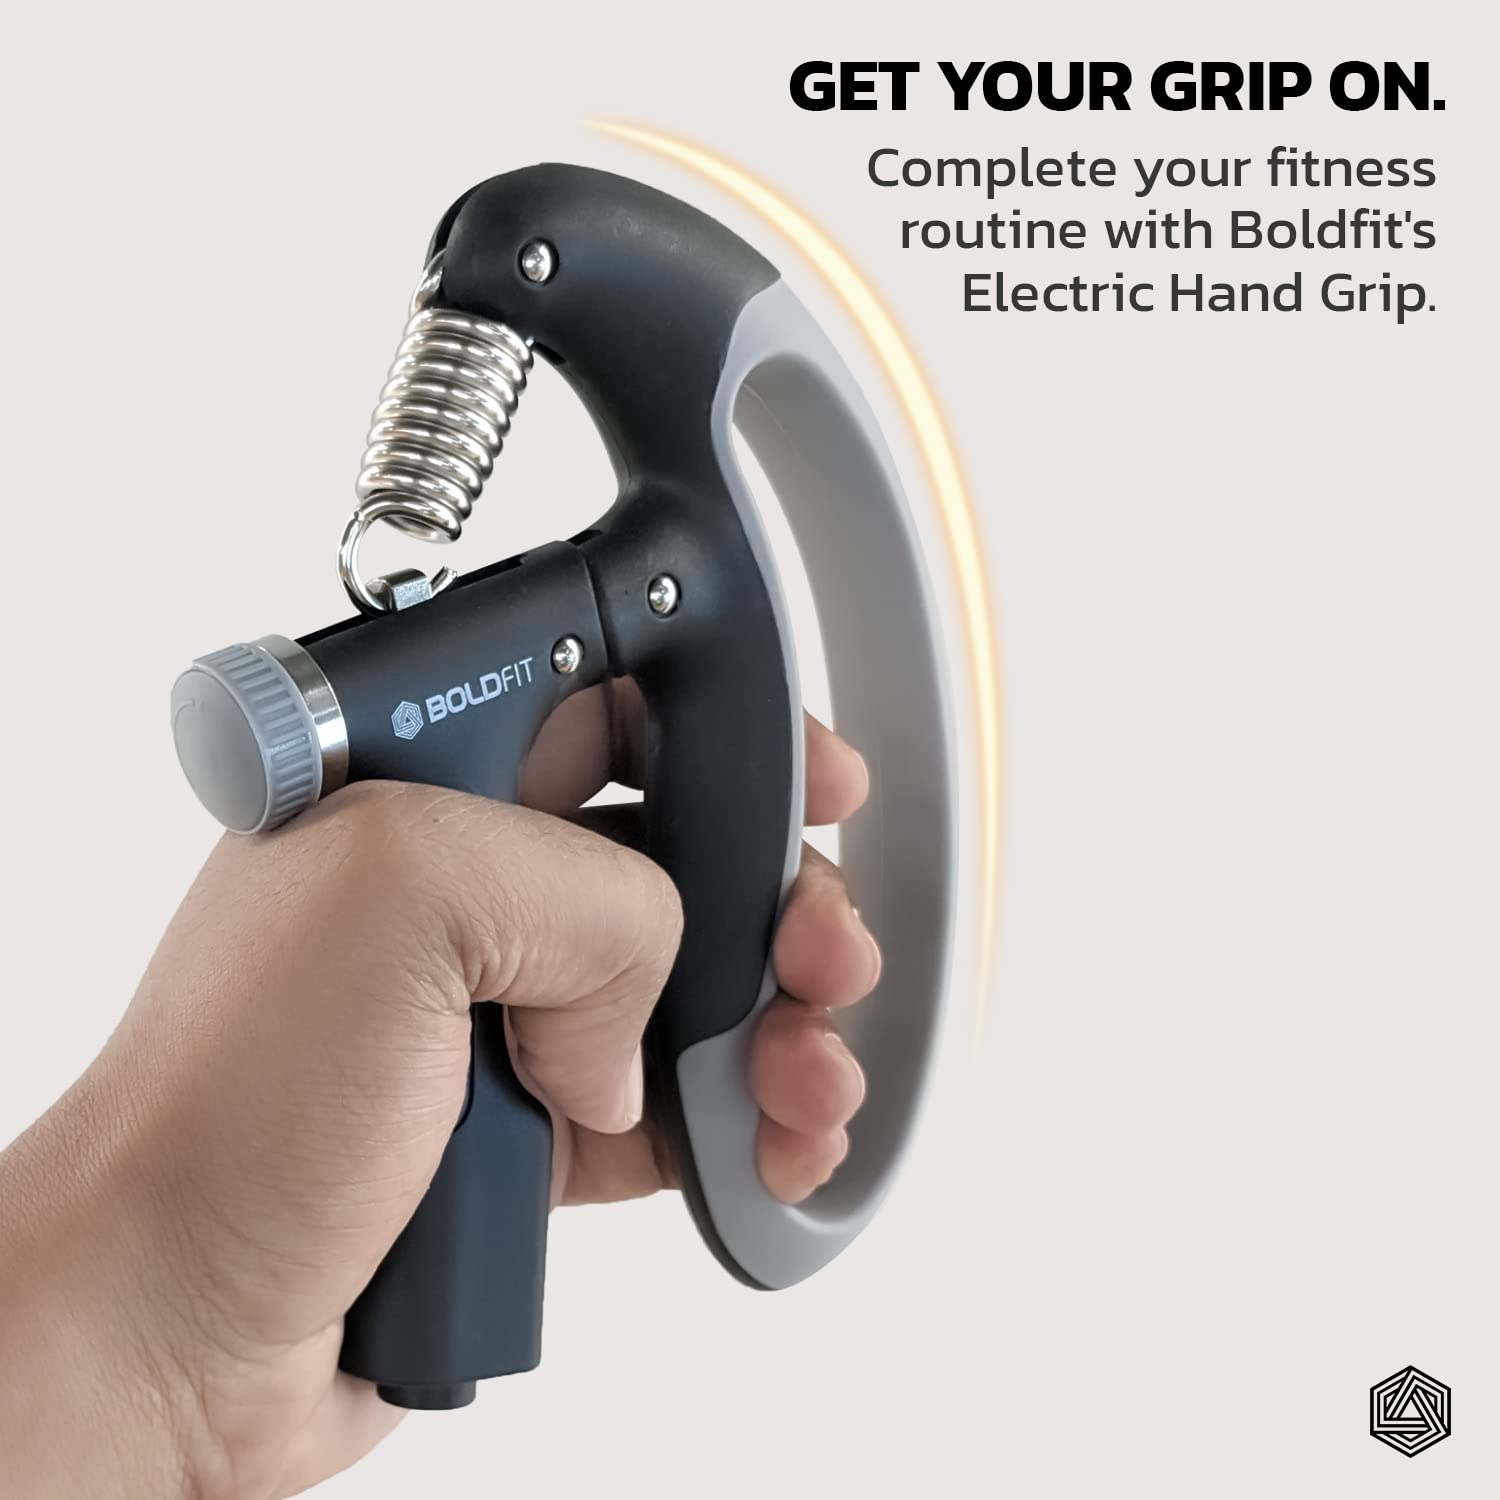 Hand Grip with Counter